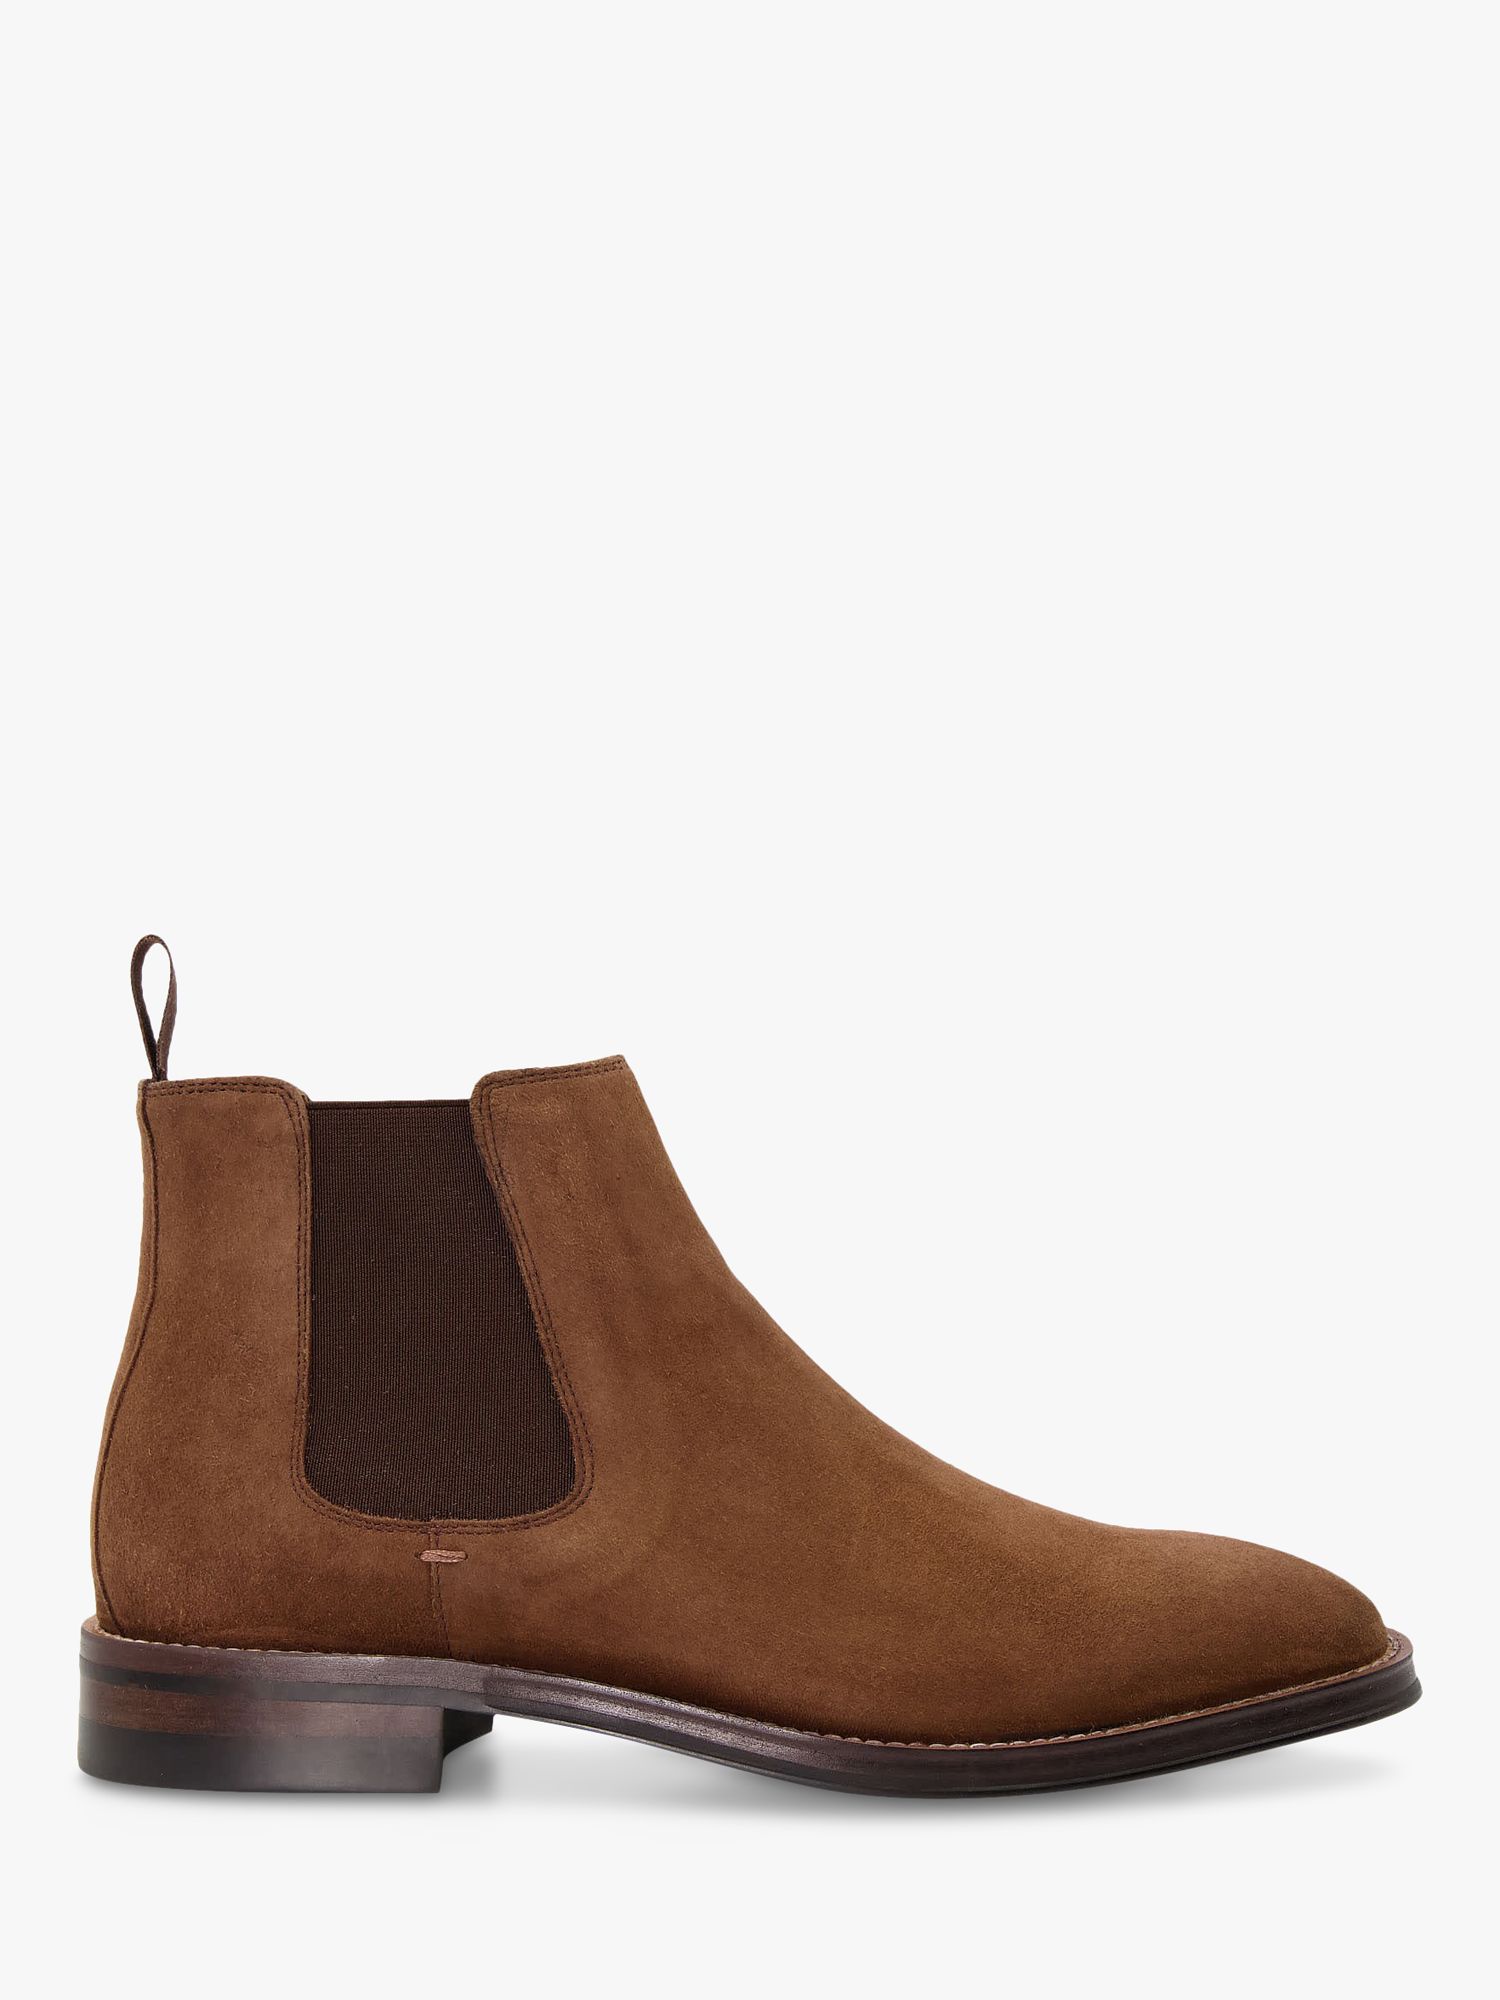 Dune Masons Suede Chelsea Boots, Brown at John Lewis & Partners